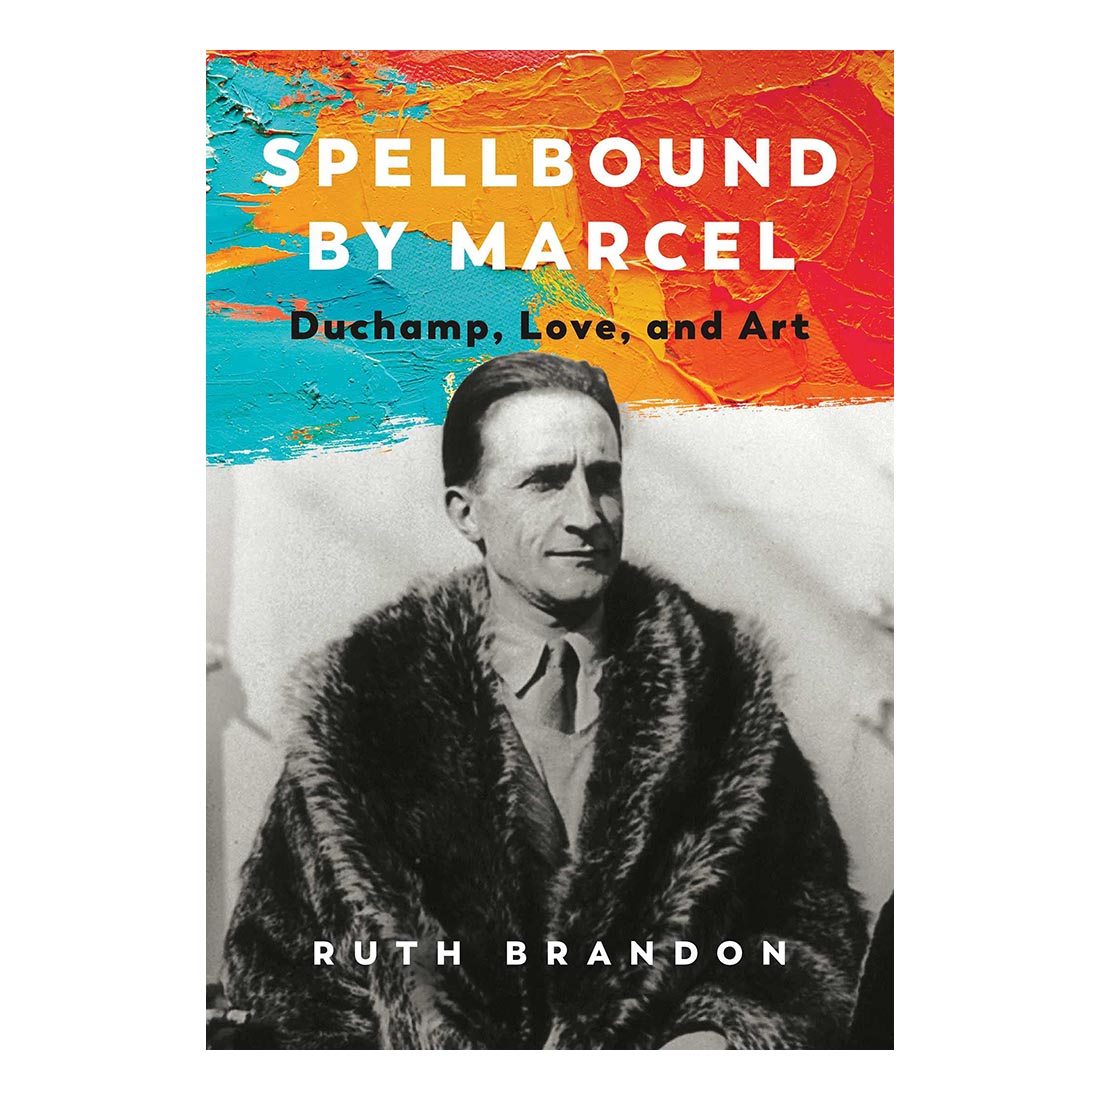 Spellbound by Marcel: Duchamp, Love, and Art